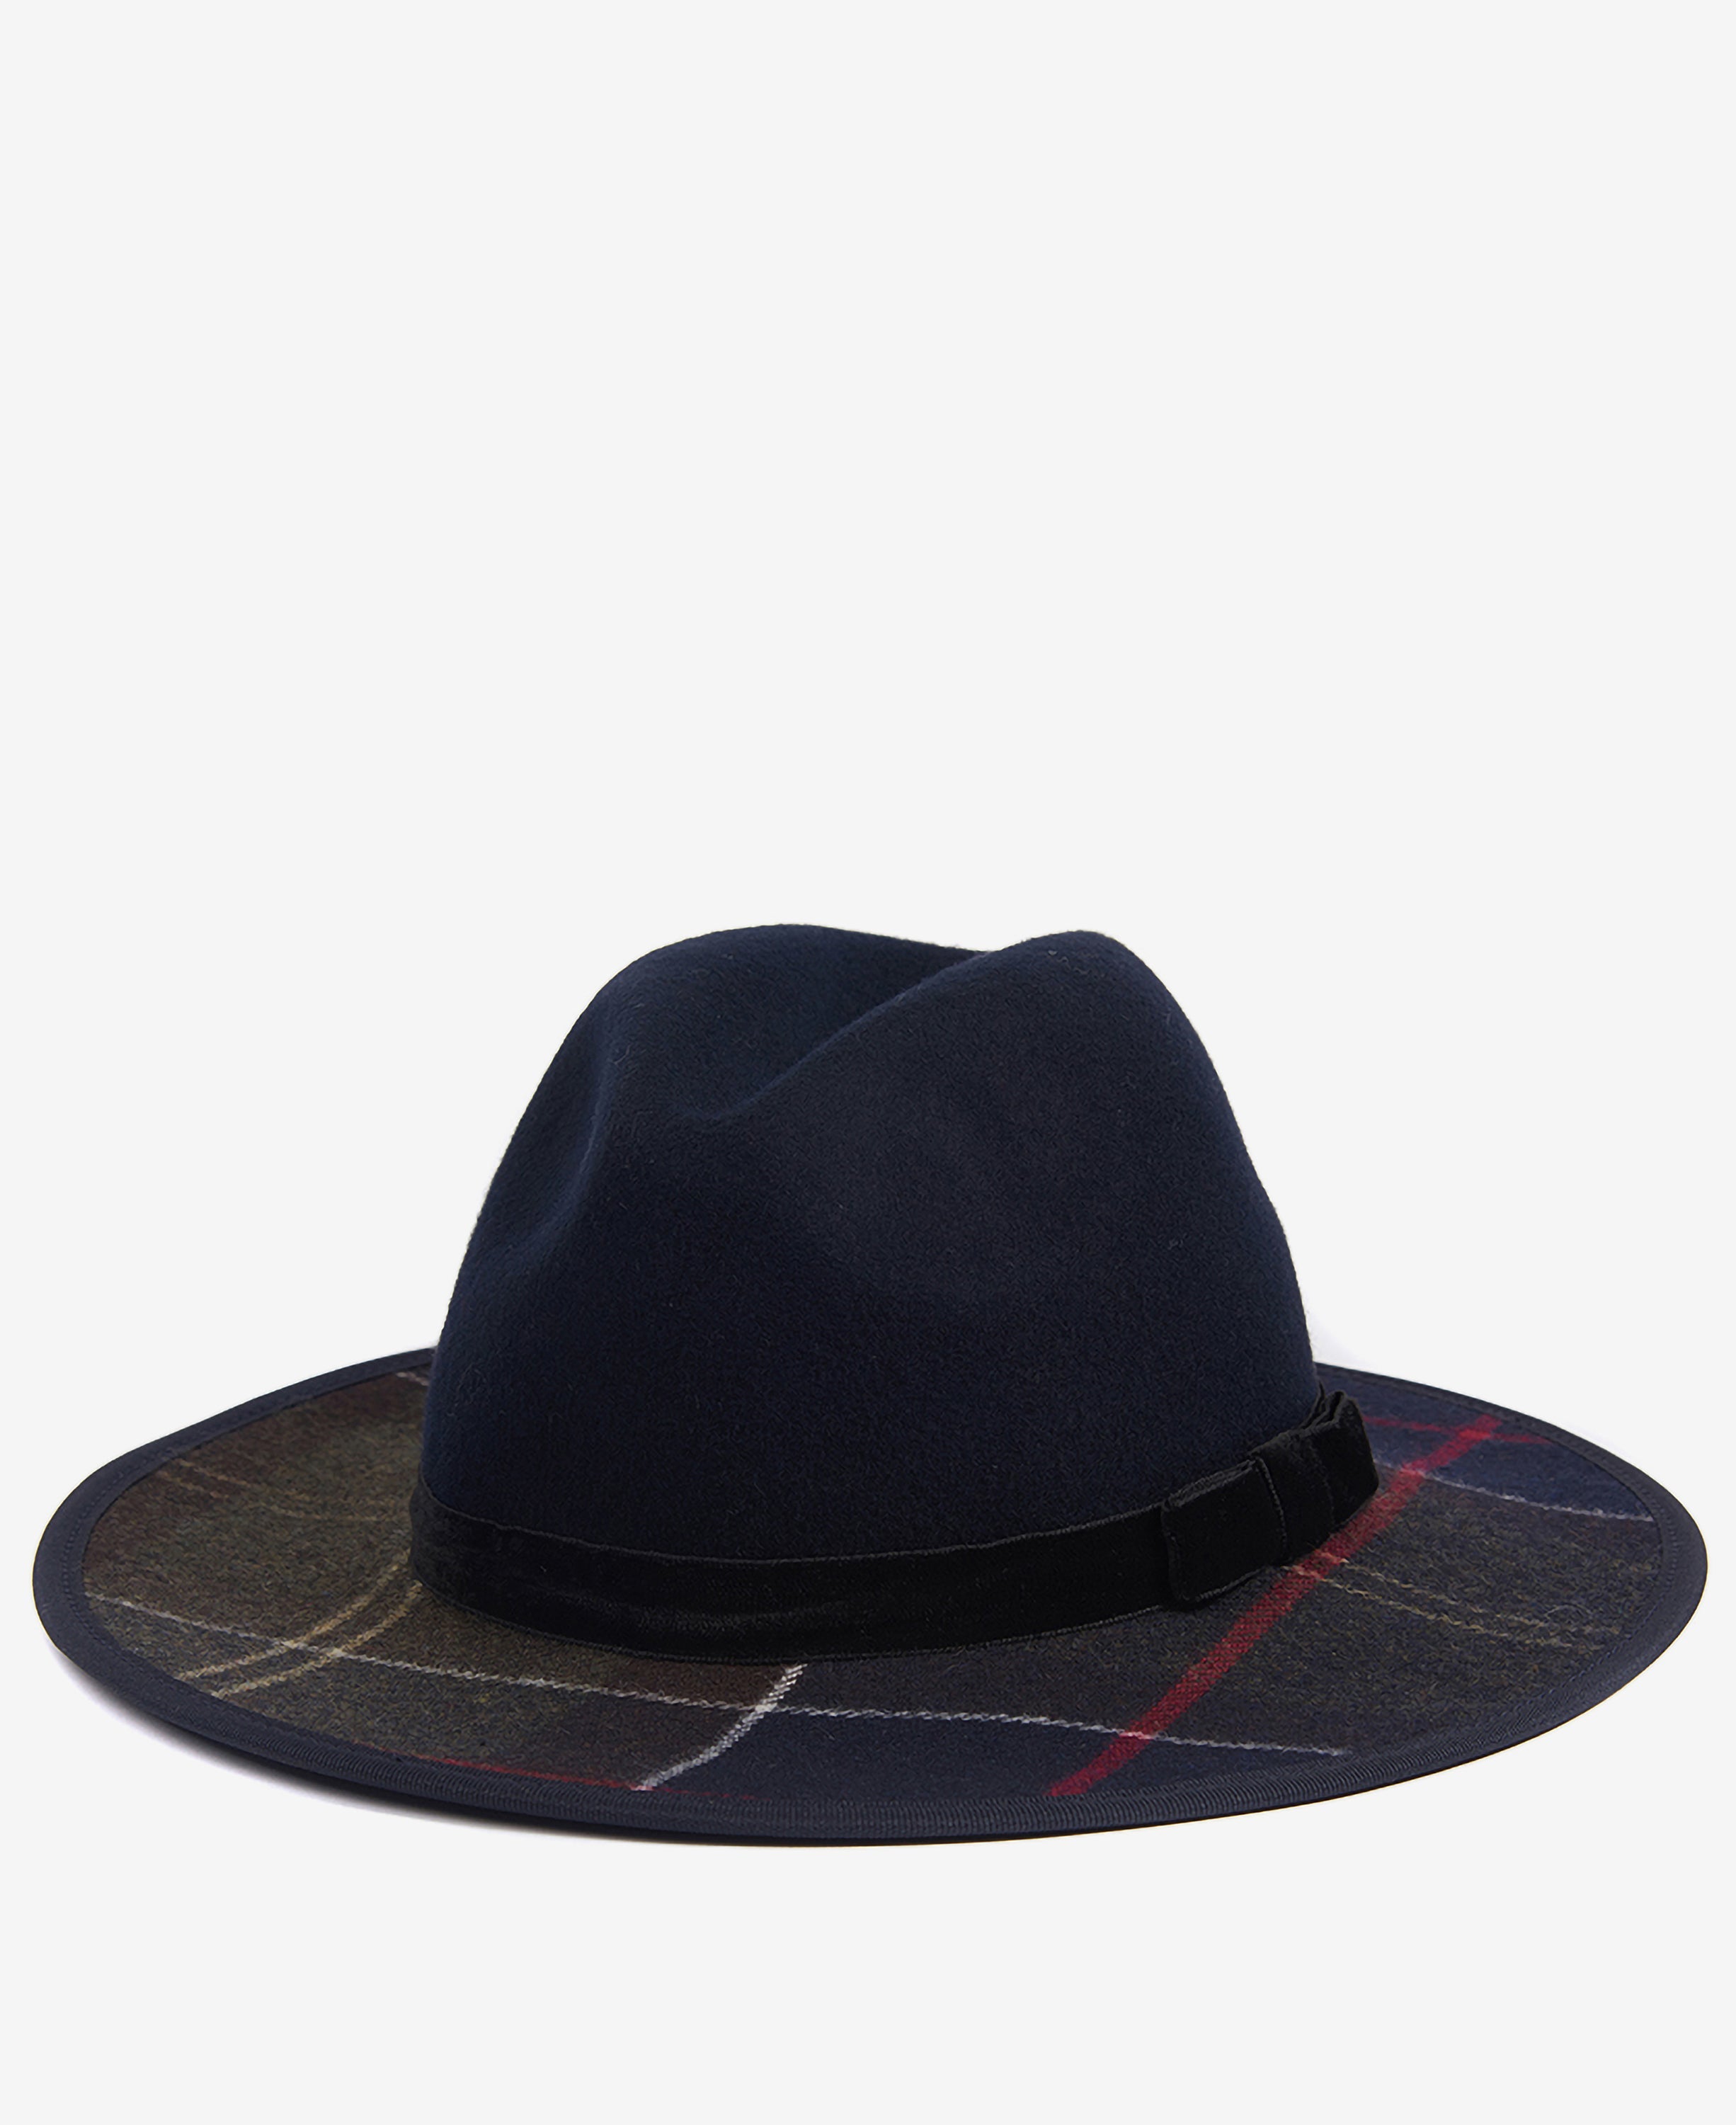 Barbour Thornhill Fedora - Navy